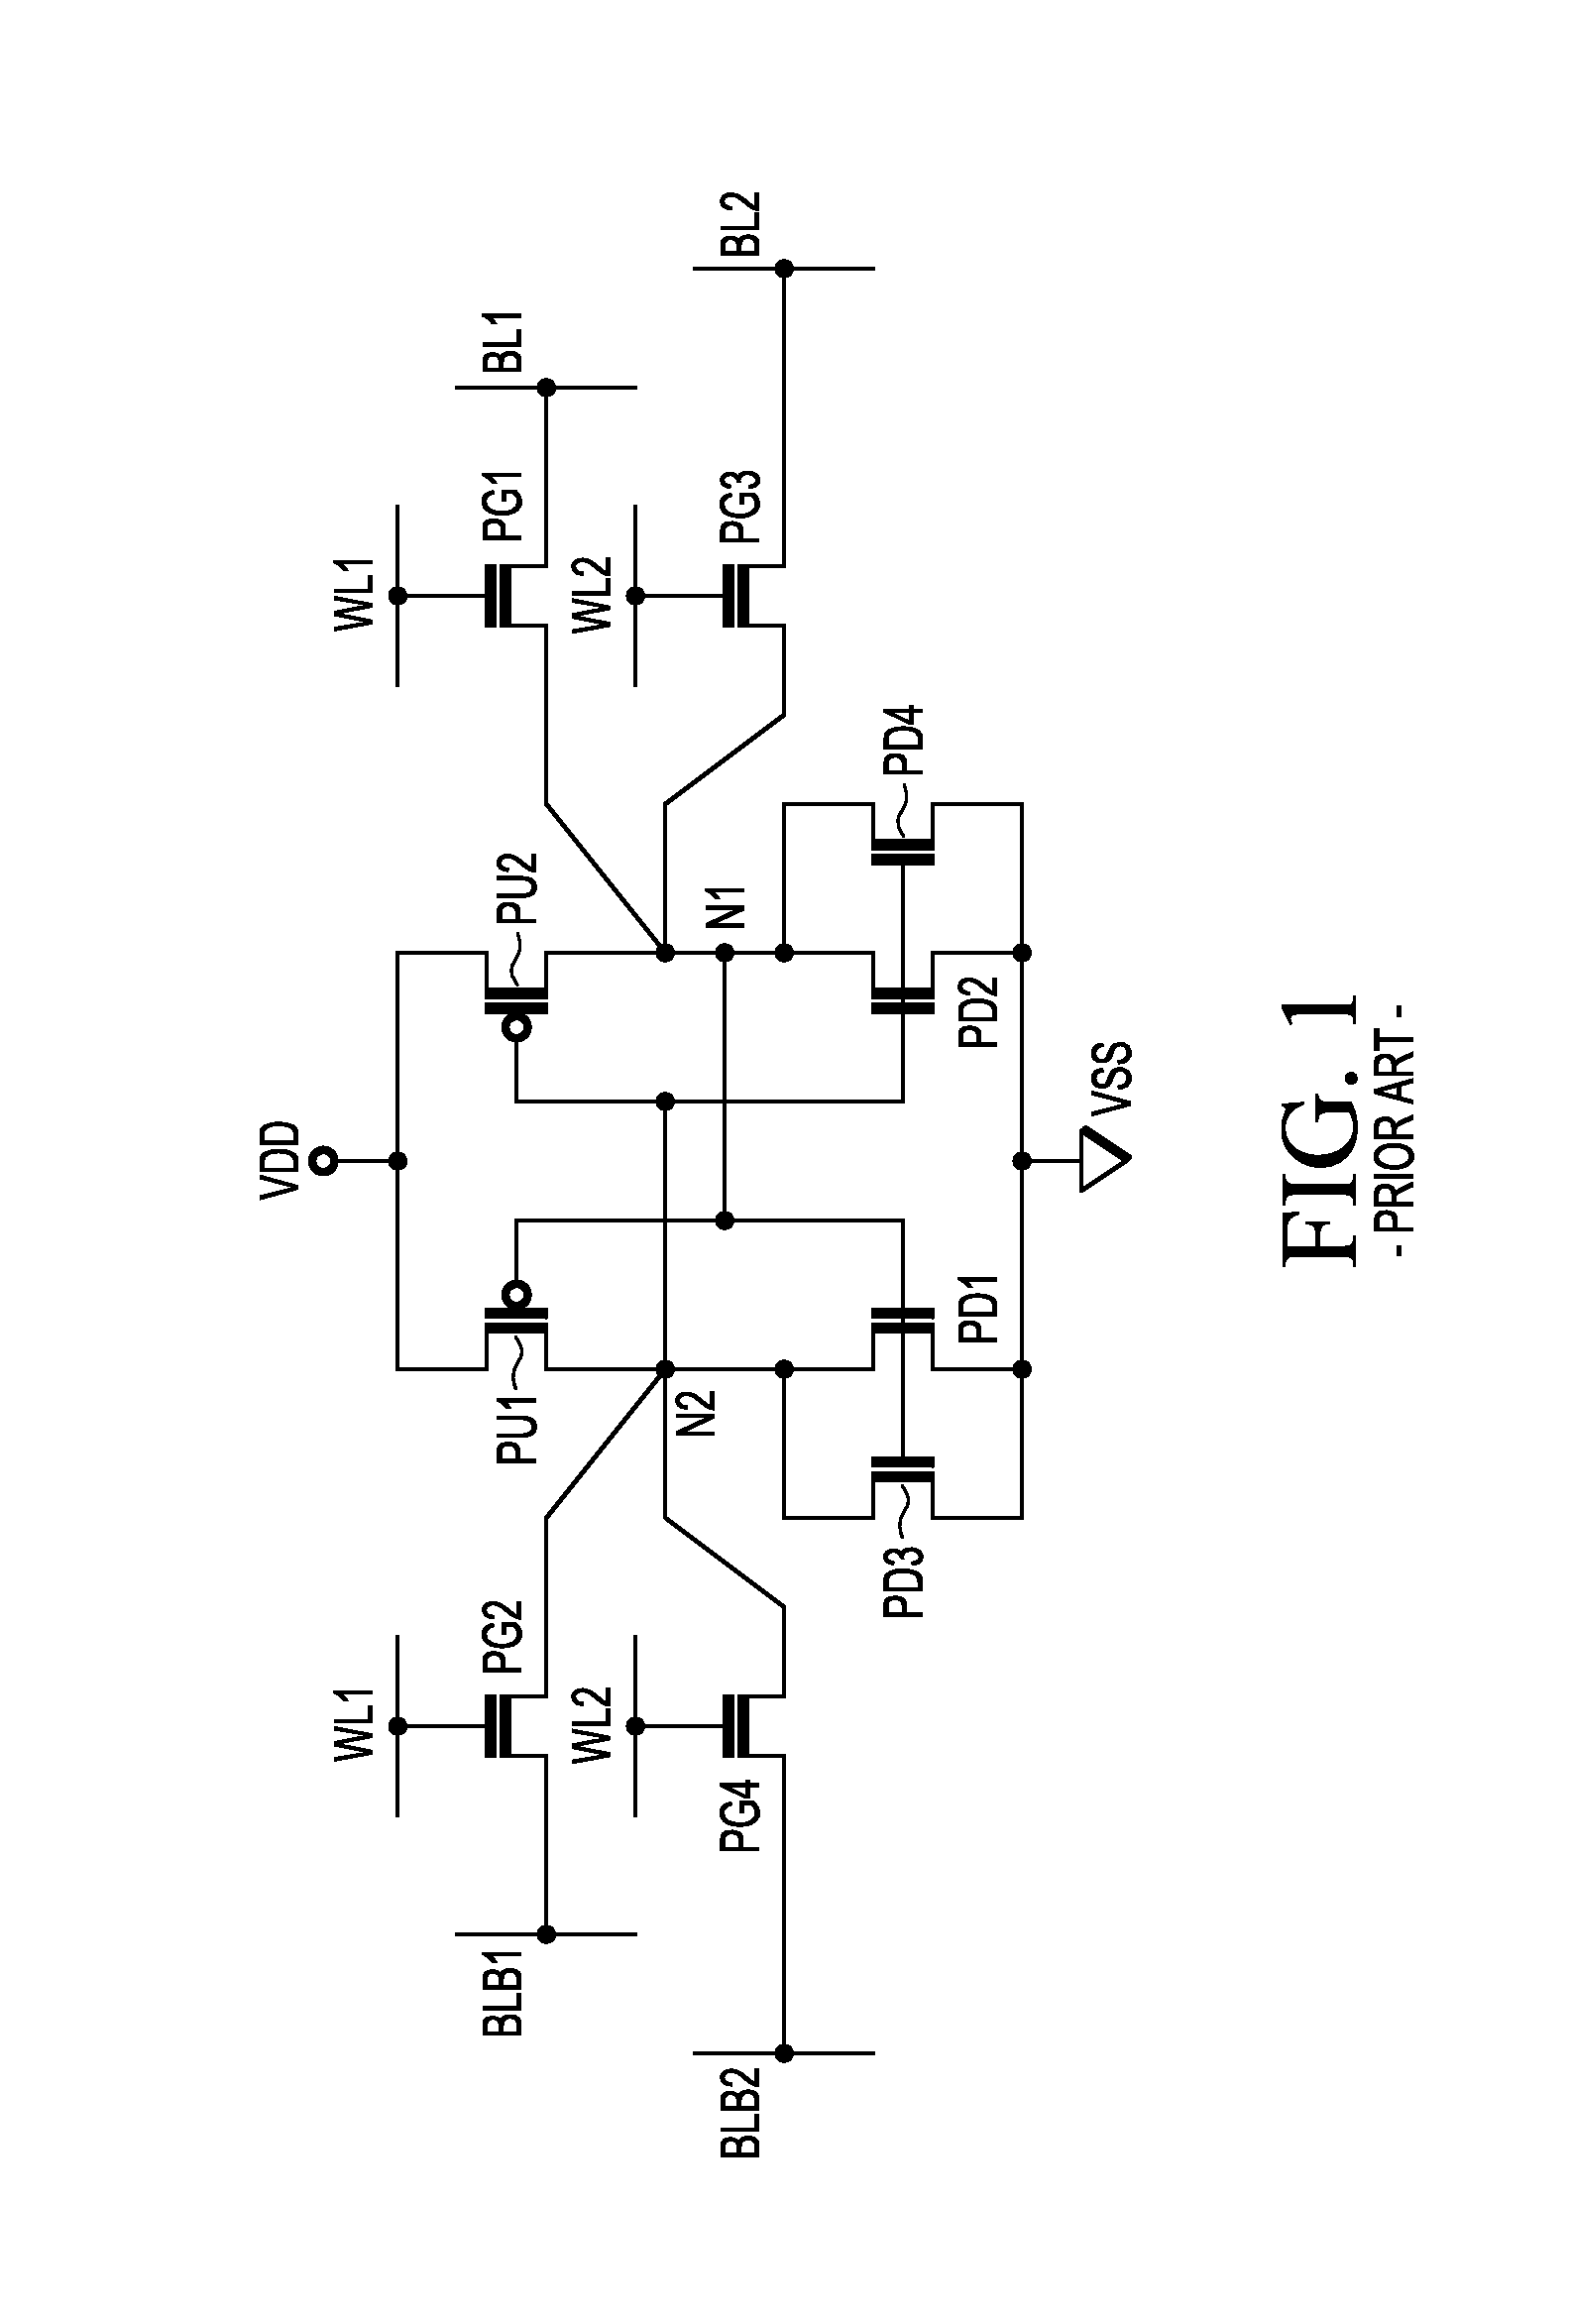 Dual port static random access memory cell layout